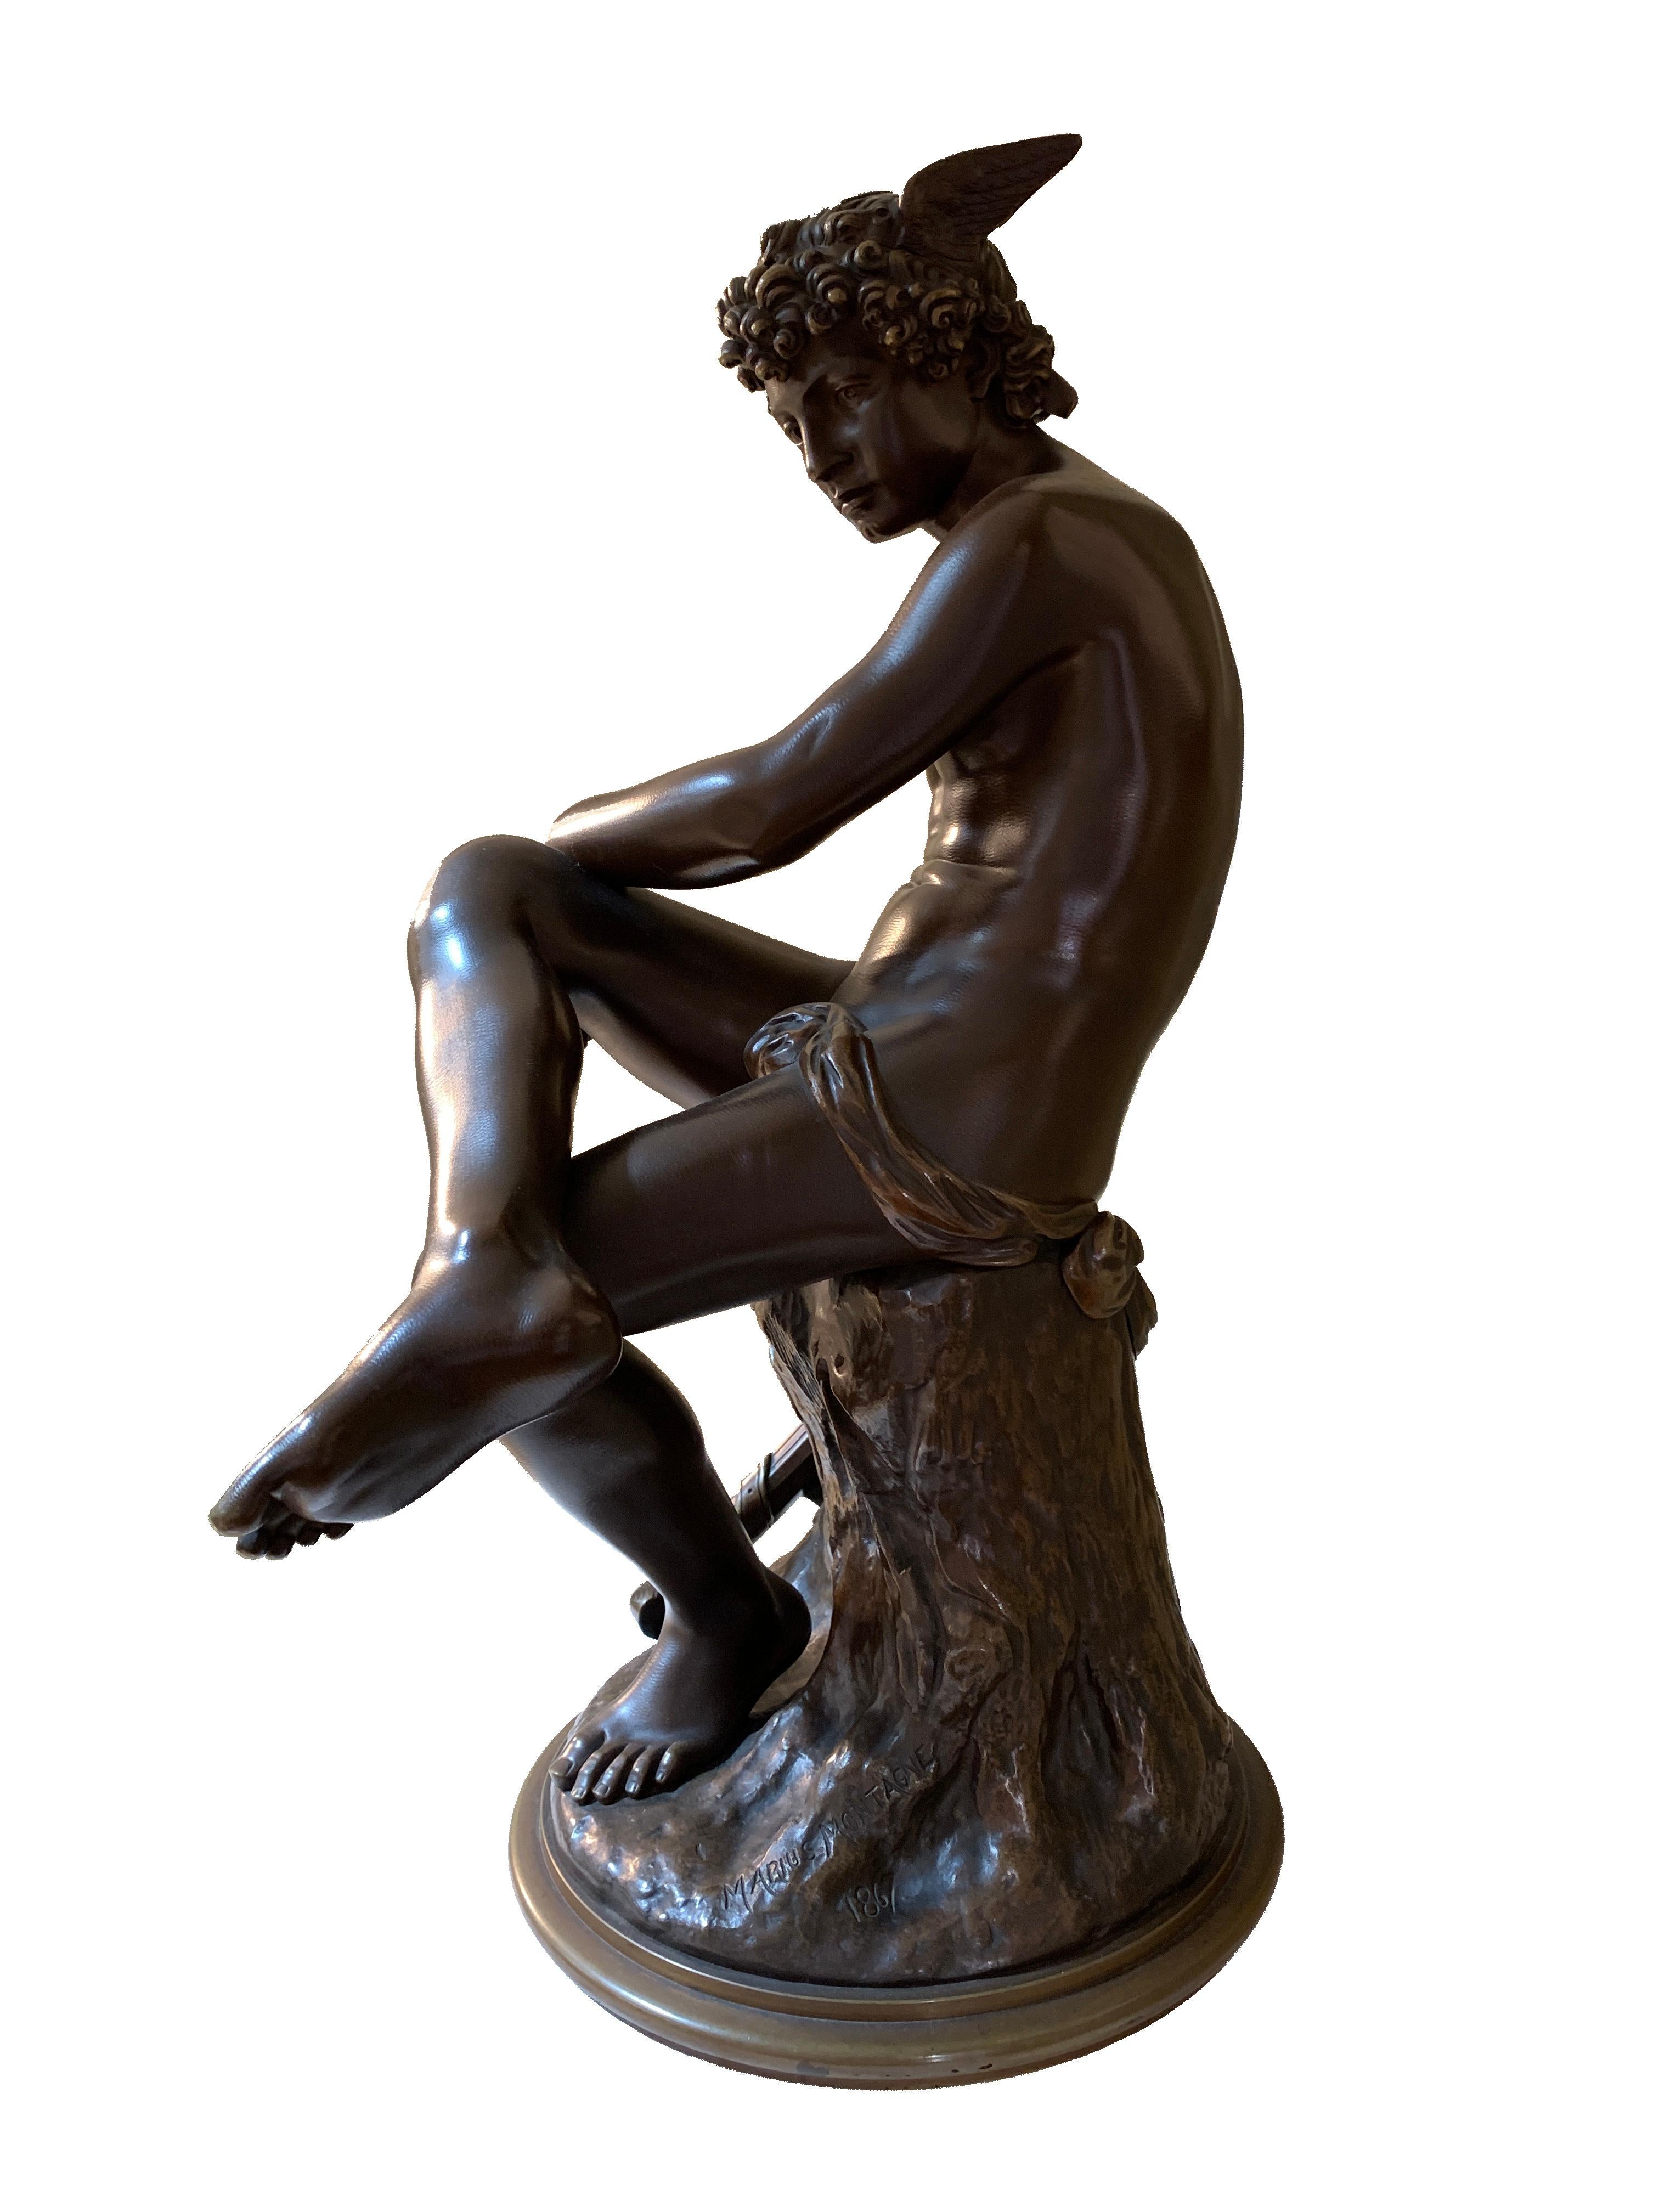 Neoclassical Bonze Sculpture of a Seated Hermes or Mercury, Dated 1867